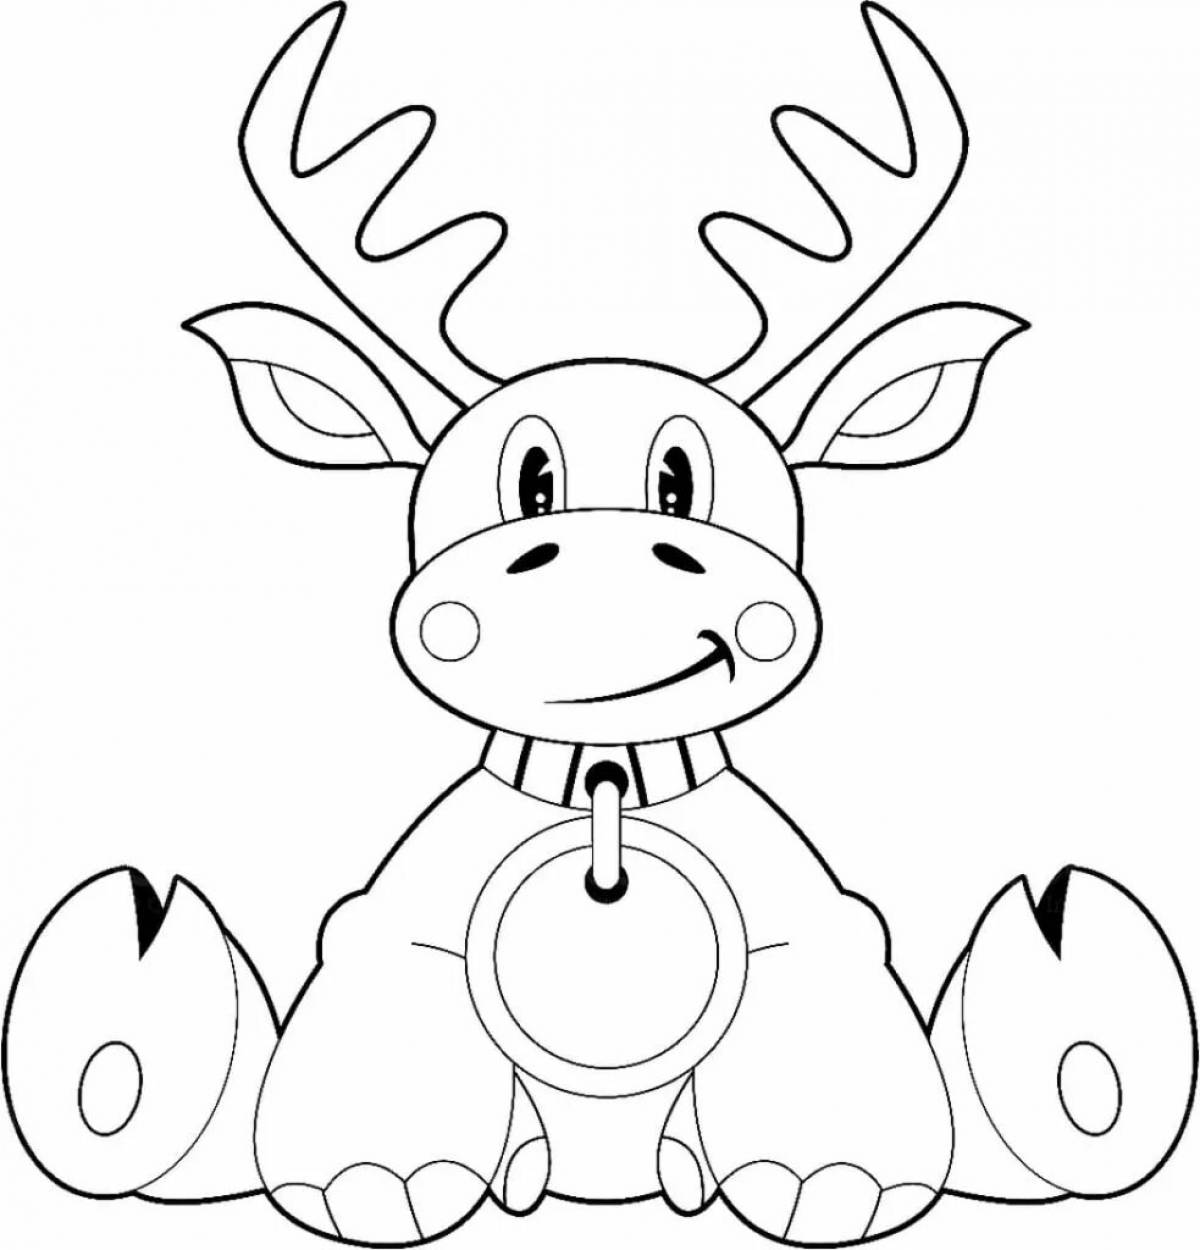 Shining Christmas reindeer coloring book for kids